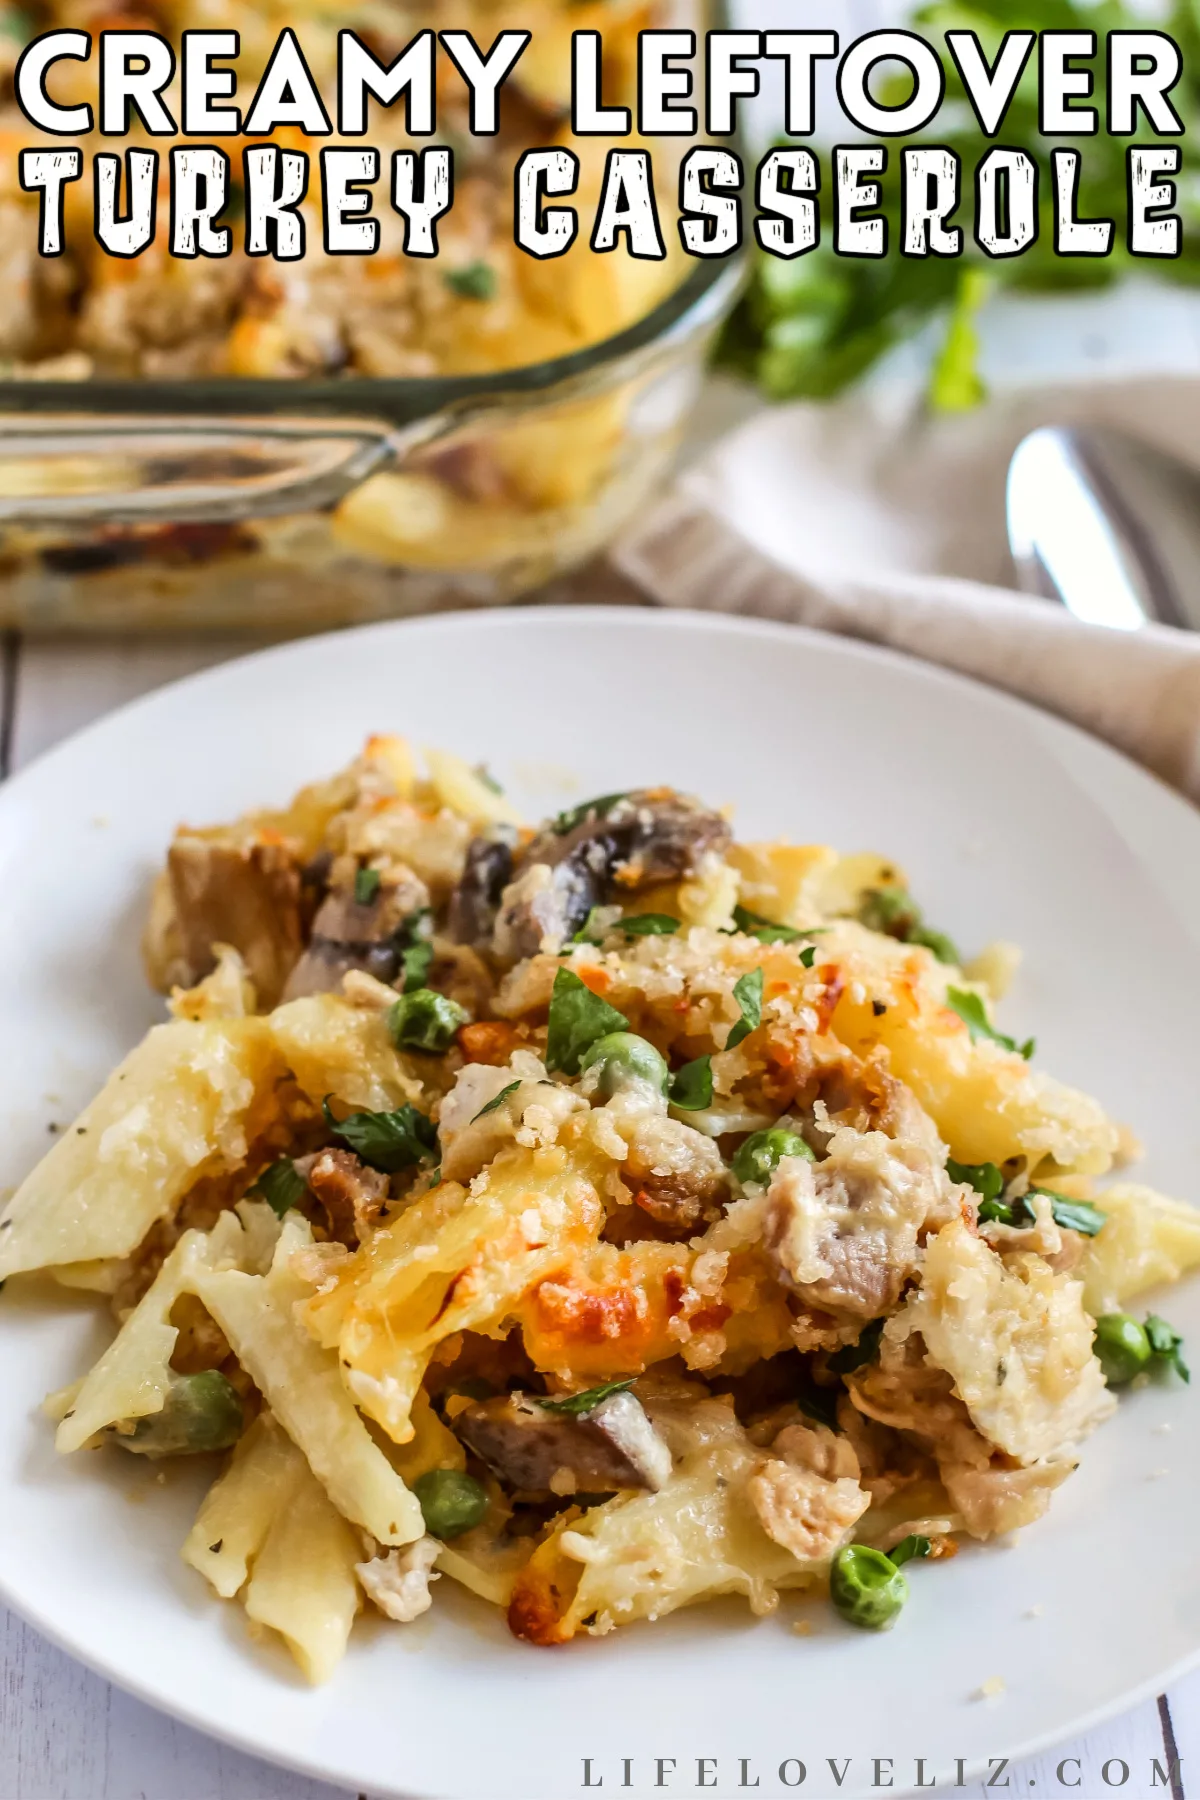 Looking for a new way to use up leftover turkey? This delicious creamy leftover turkey casserole recipe will satisfy your whole family!